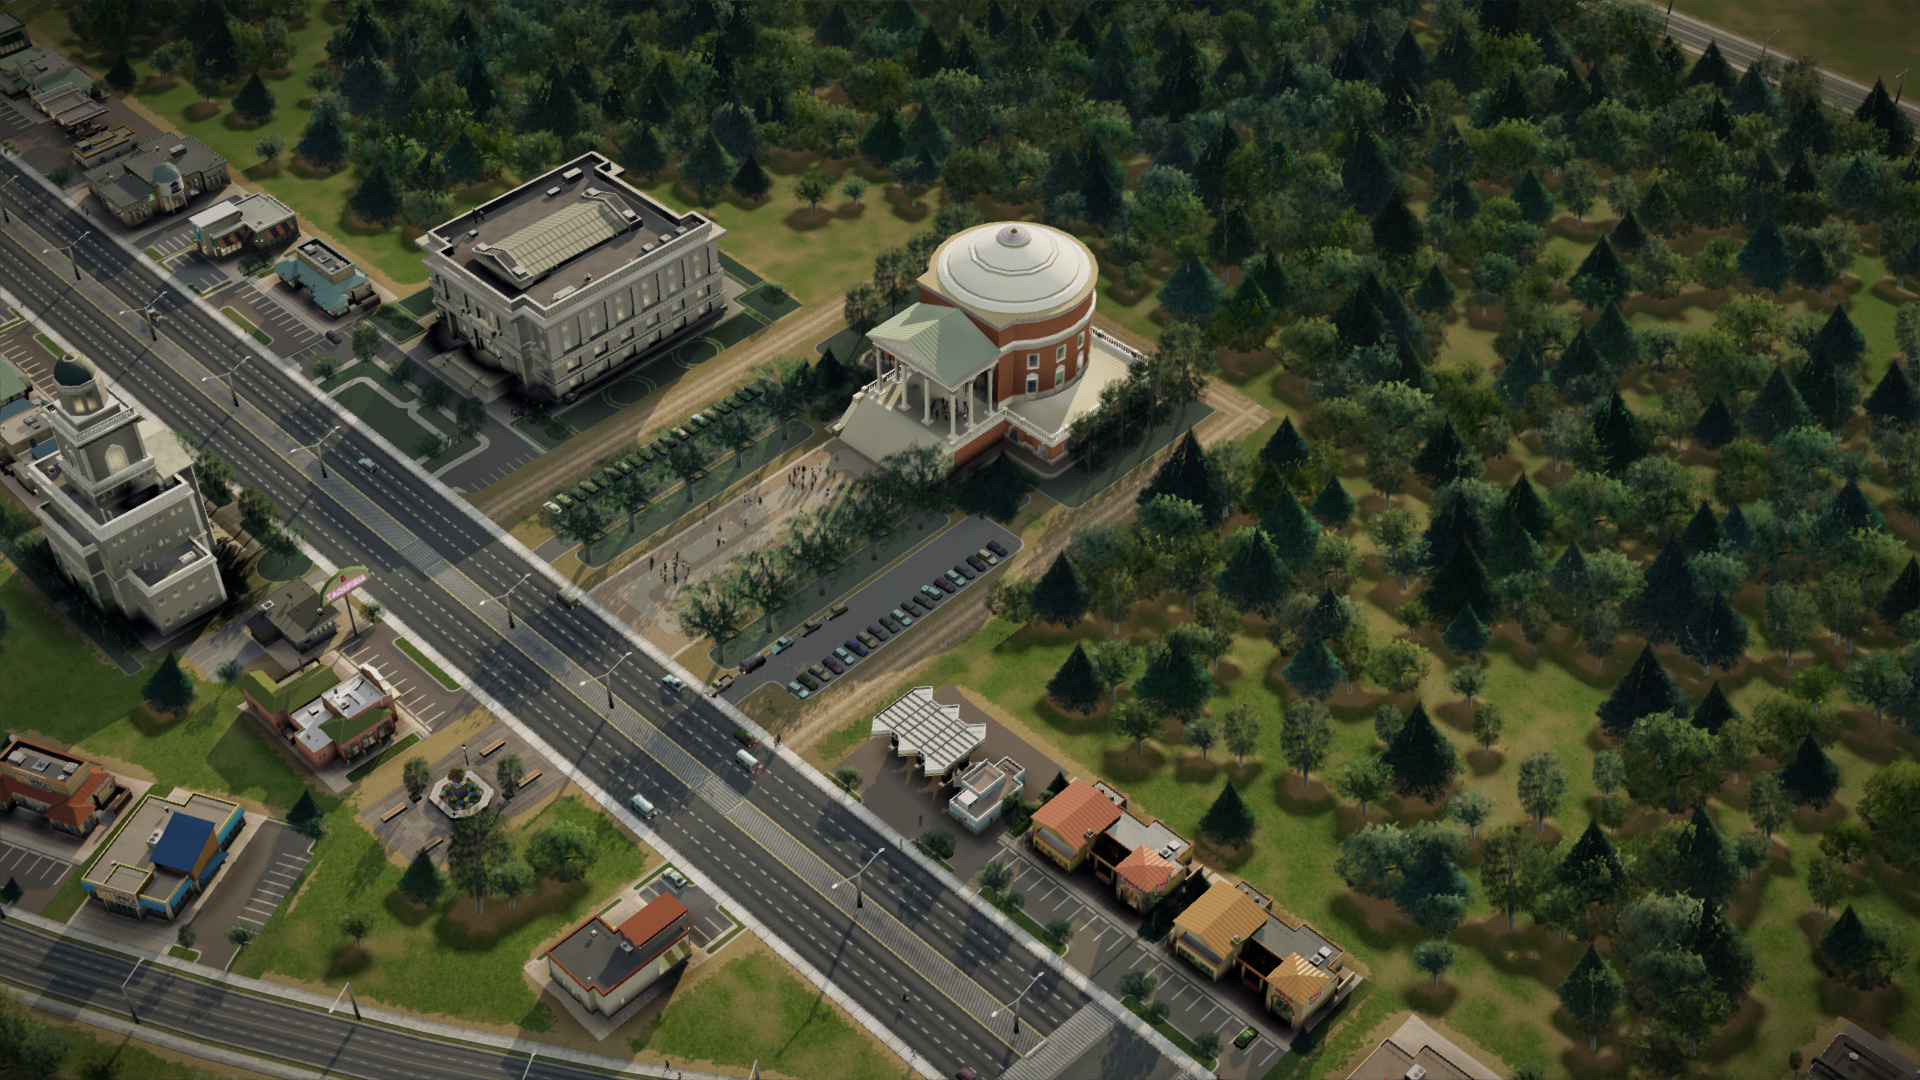 Simcity: What it's like to play in the 16 City Region "Viridian Woods 